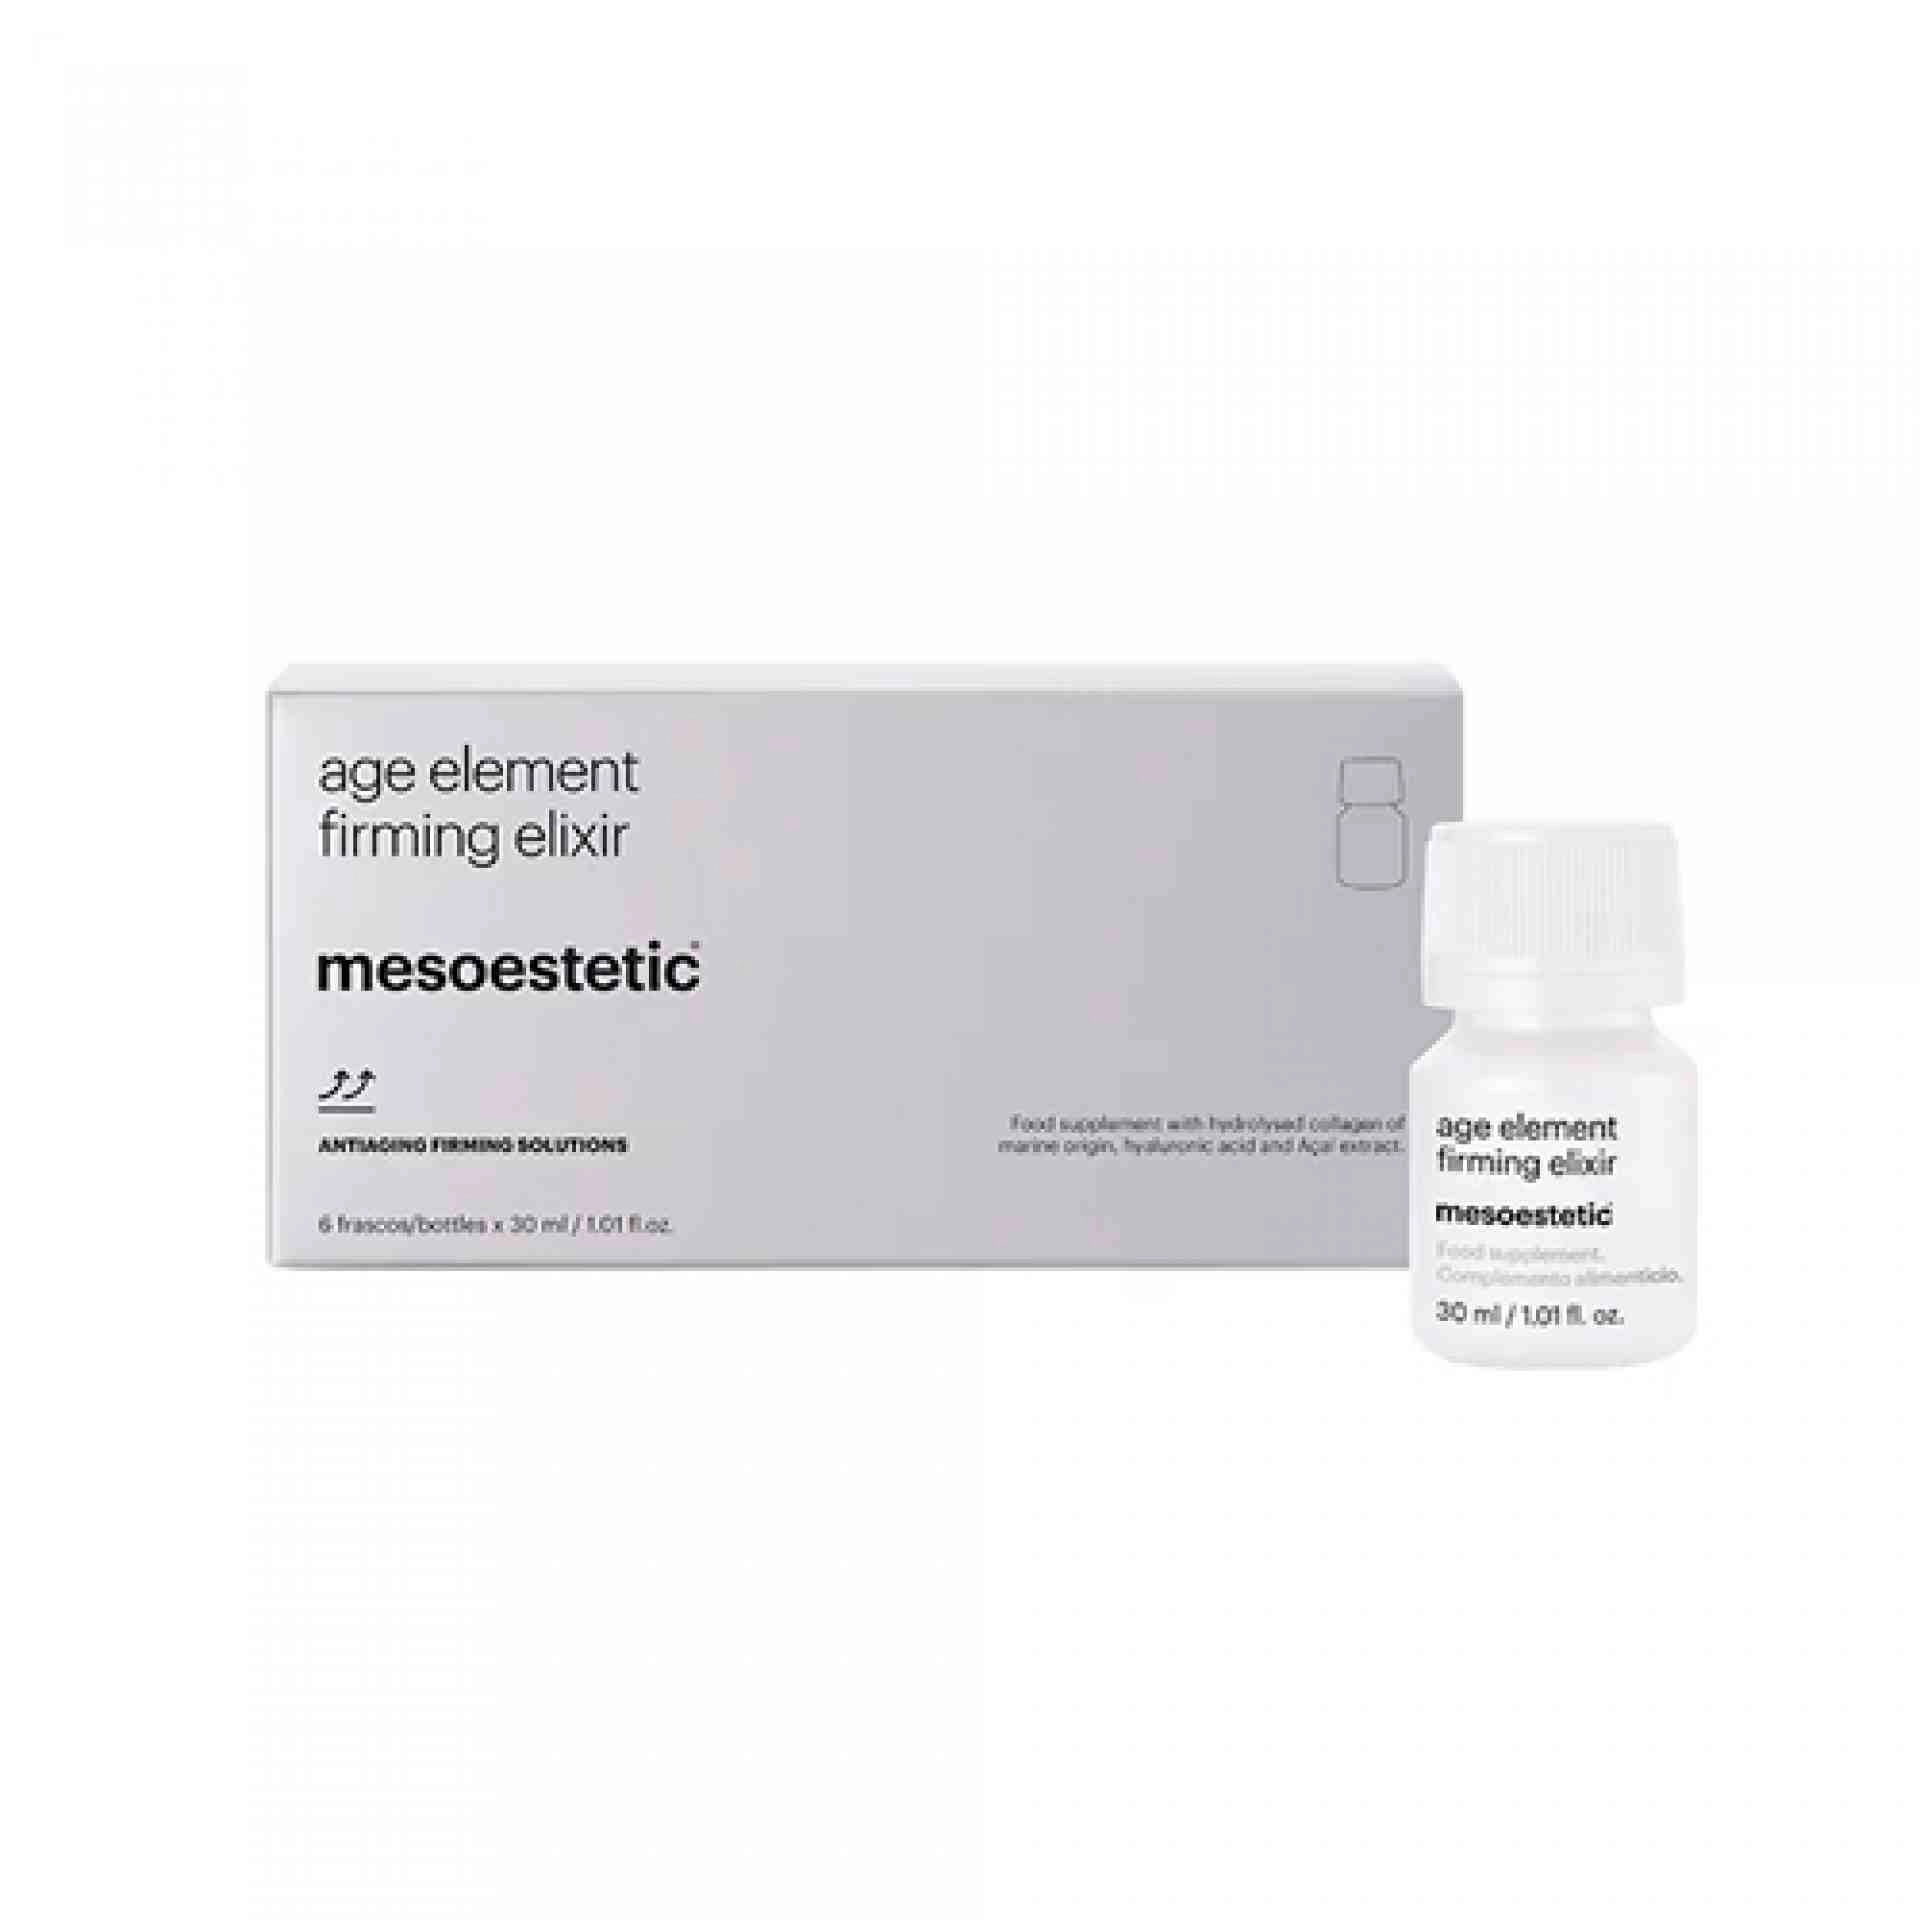 age element firming elixir | nutricosmético 6x30ml - antiaging firming solutions - mesoestetic ®